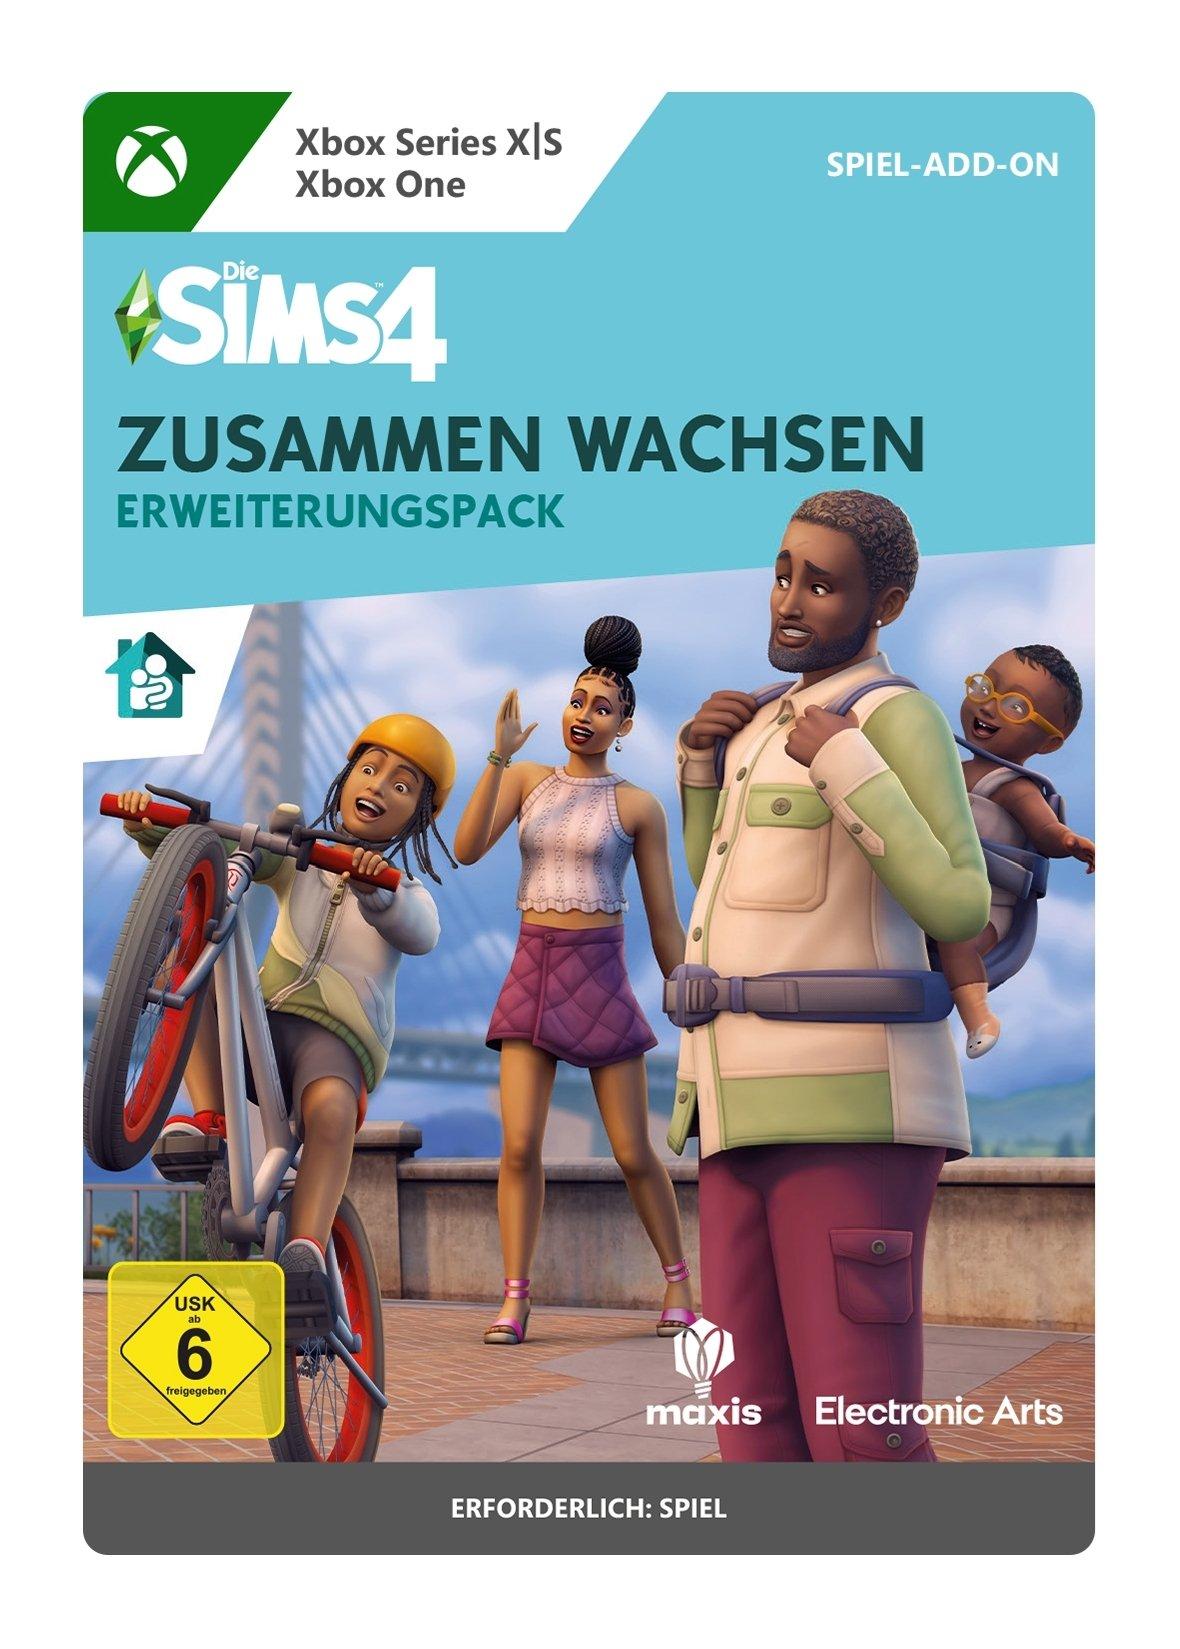 The Sims 4: Growing Together Expansion Pack - Xbox One - Add-on | 7D4-00651 (2ff2cc6d-b3e0-be41-a3e3-73773d9e644d)